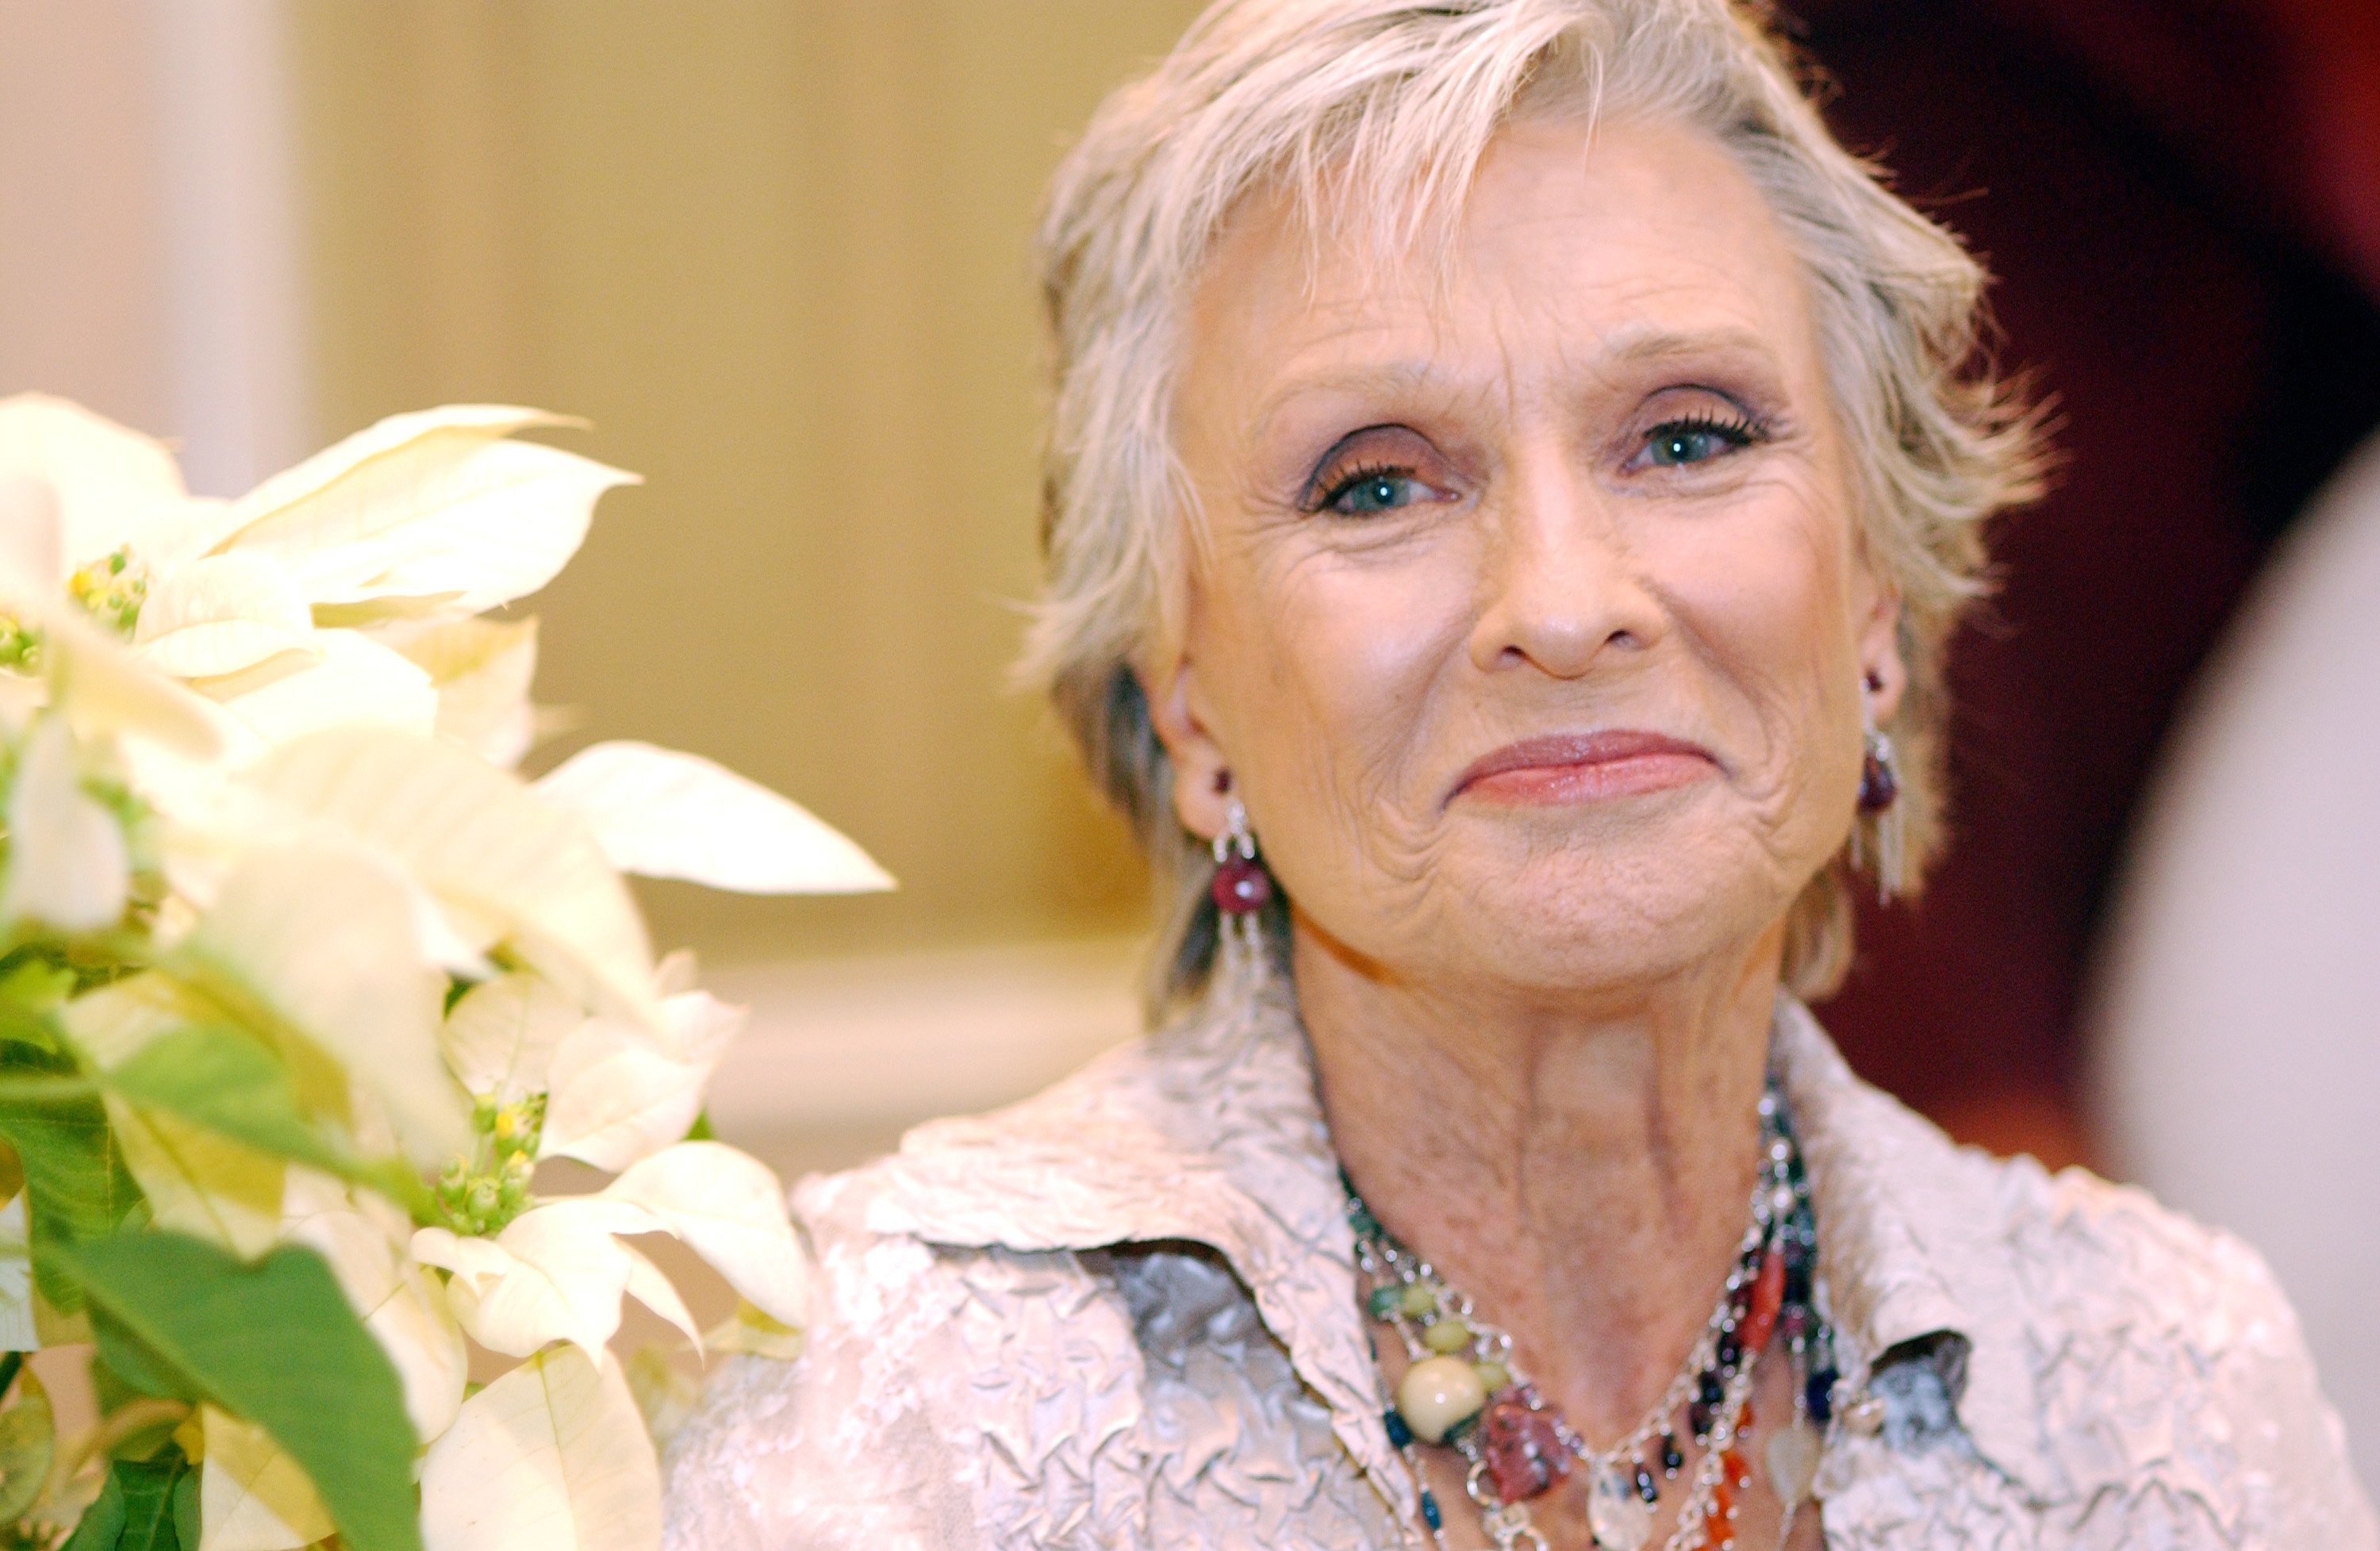 Cloris Leachman during "Spanglish" Press Conference with Adam Sandler, Tea Leoni, James L. Brooks, Paz Vega and Cloris Leachman at Four Seasons Hotel in Los Angeles, California, United States. | Source: Getty Images